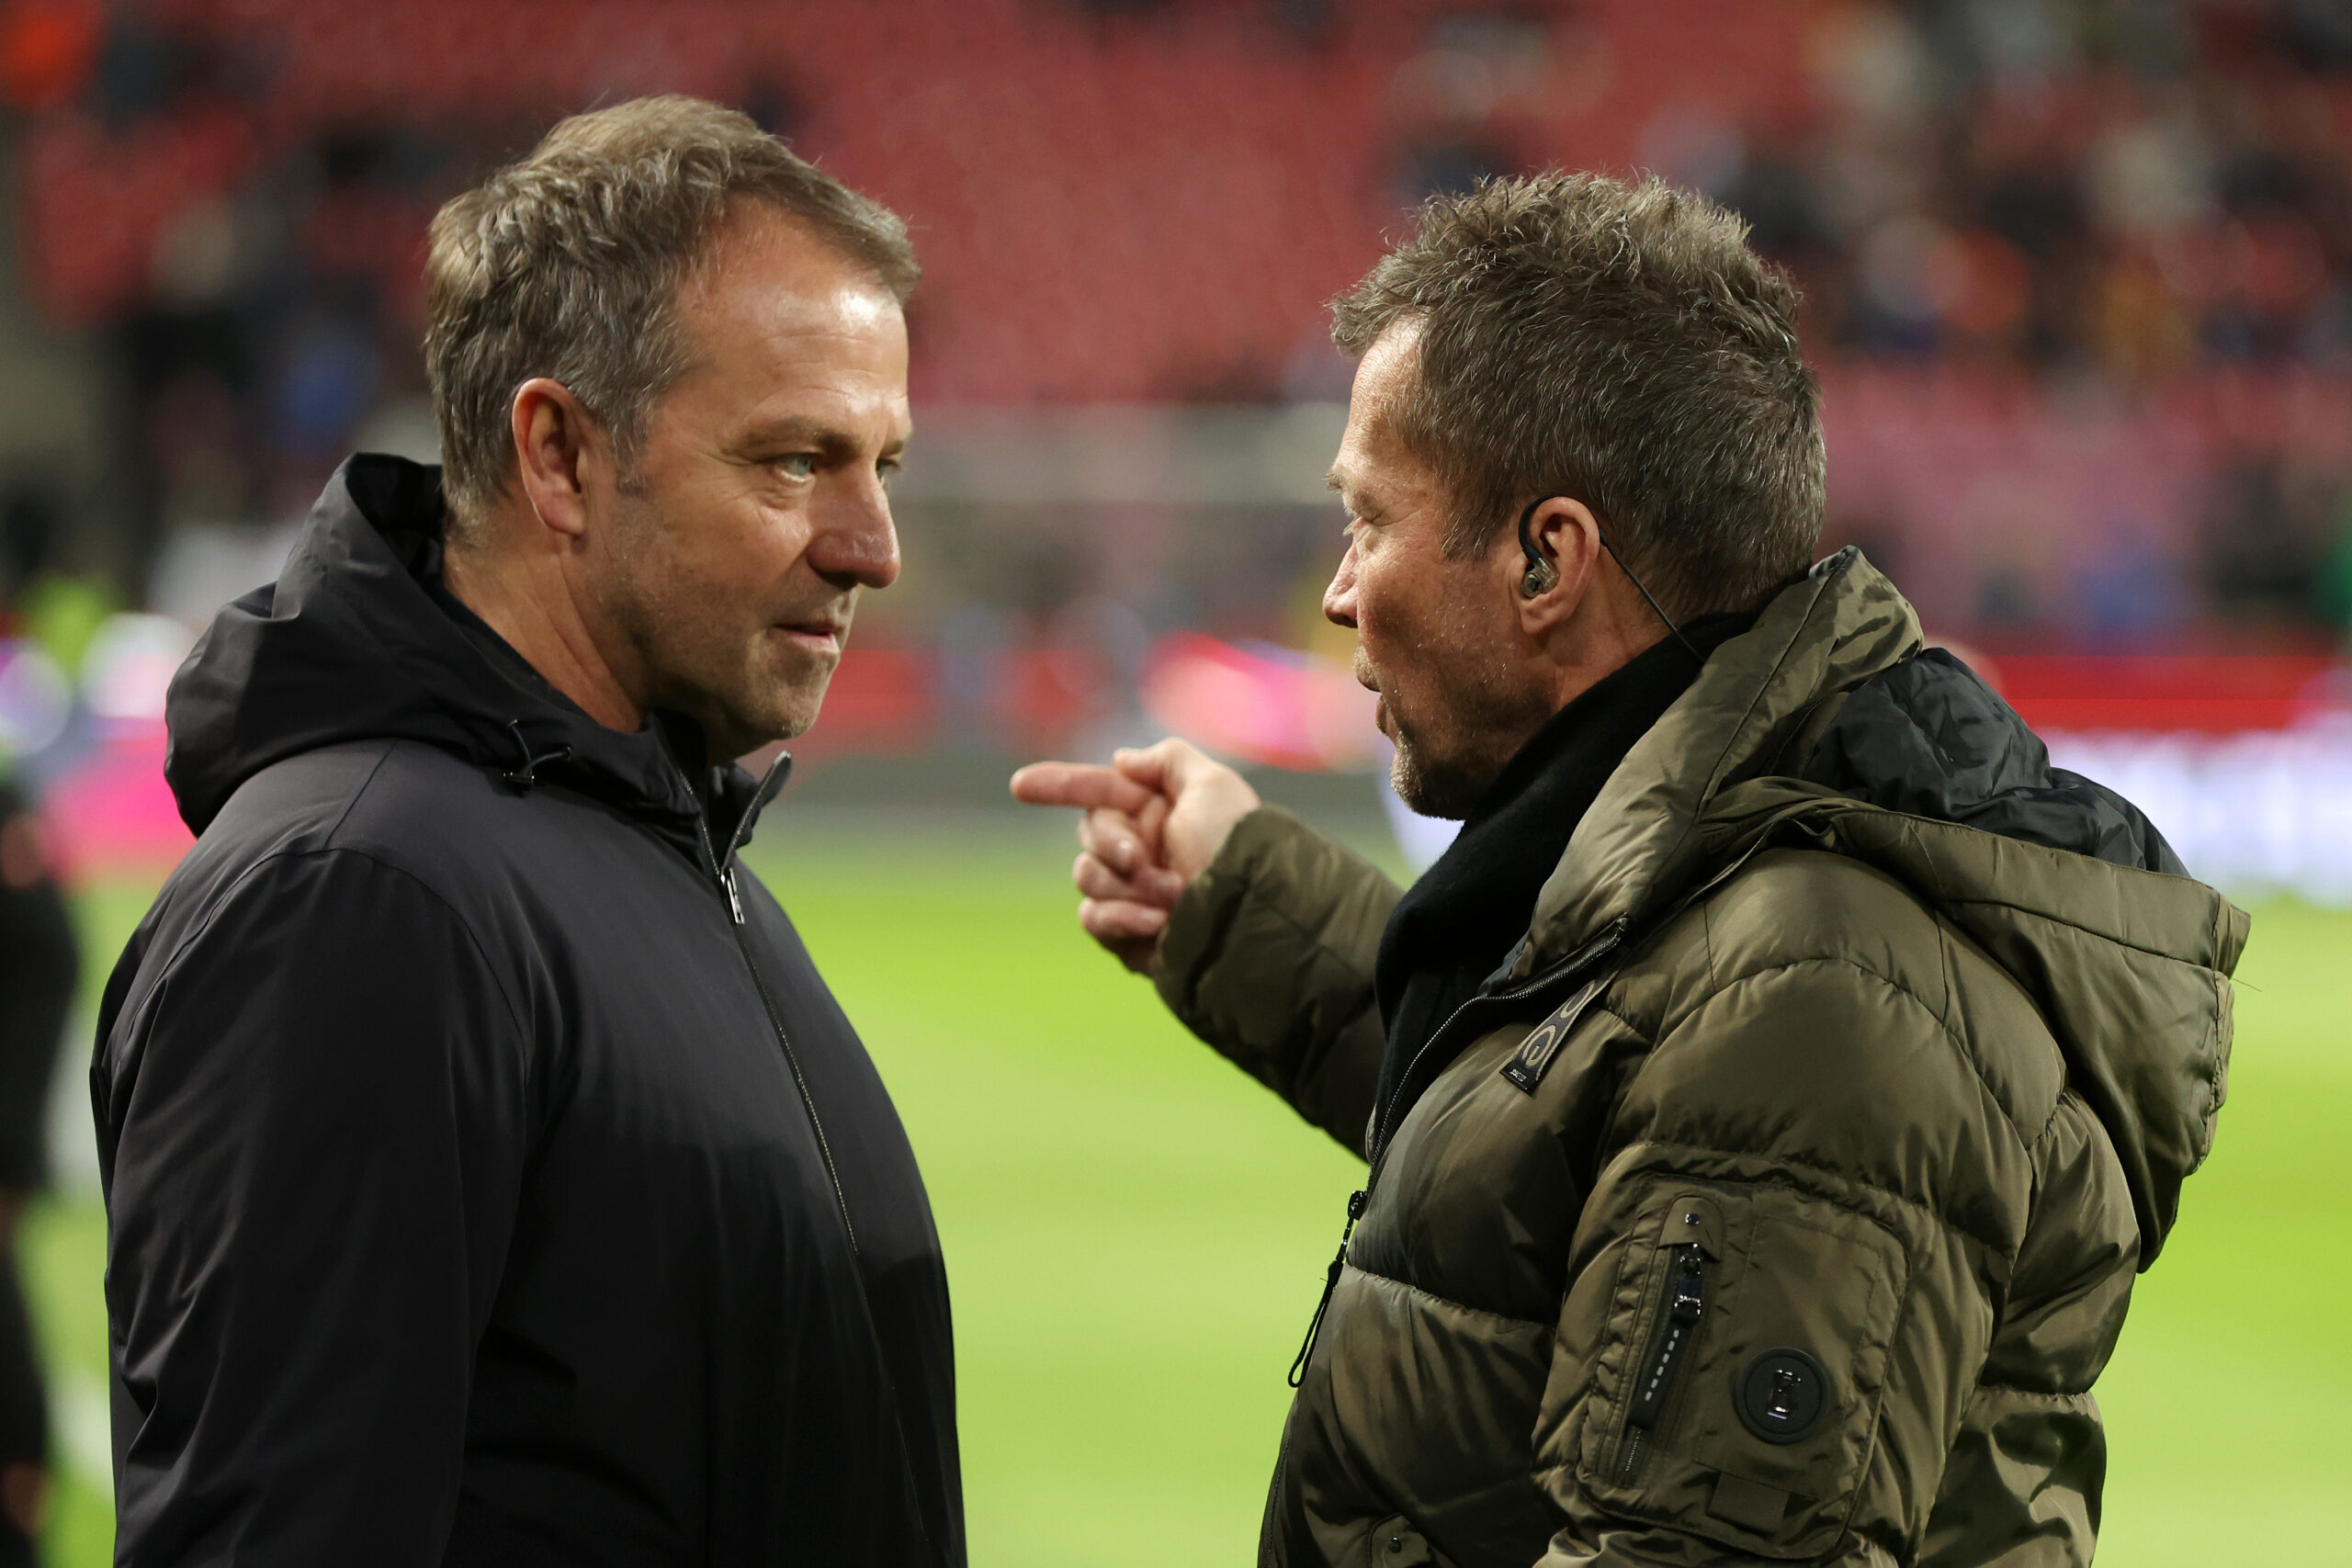 COLOGNE, GERMANY - MARCH 28: Hansi Flick, Head Coach of Germany speaks to former Germany player Lothar Matthaus prior to the international friendly match between Germany and Belgium at RheinEnergieStadion on March 28, 2023 in Cologne, Germany.